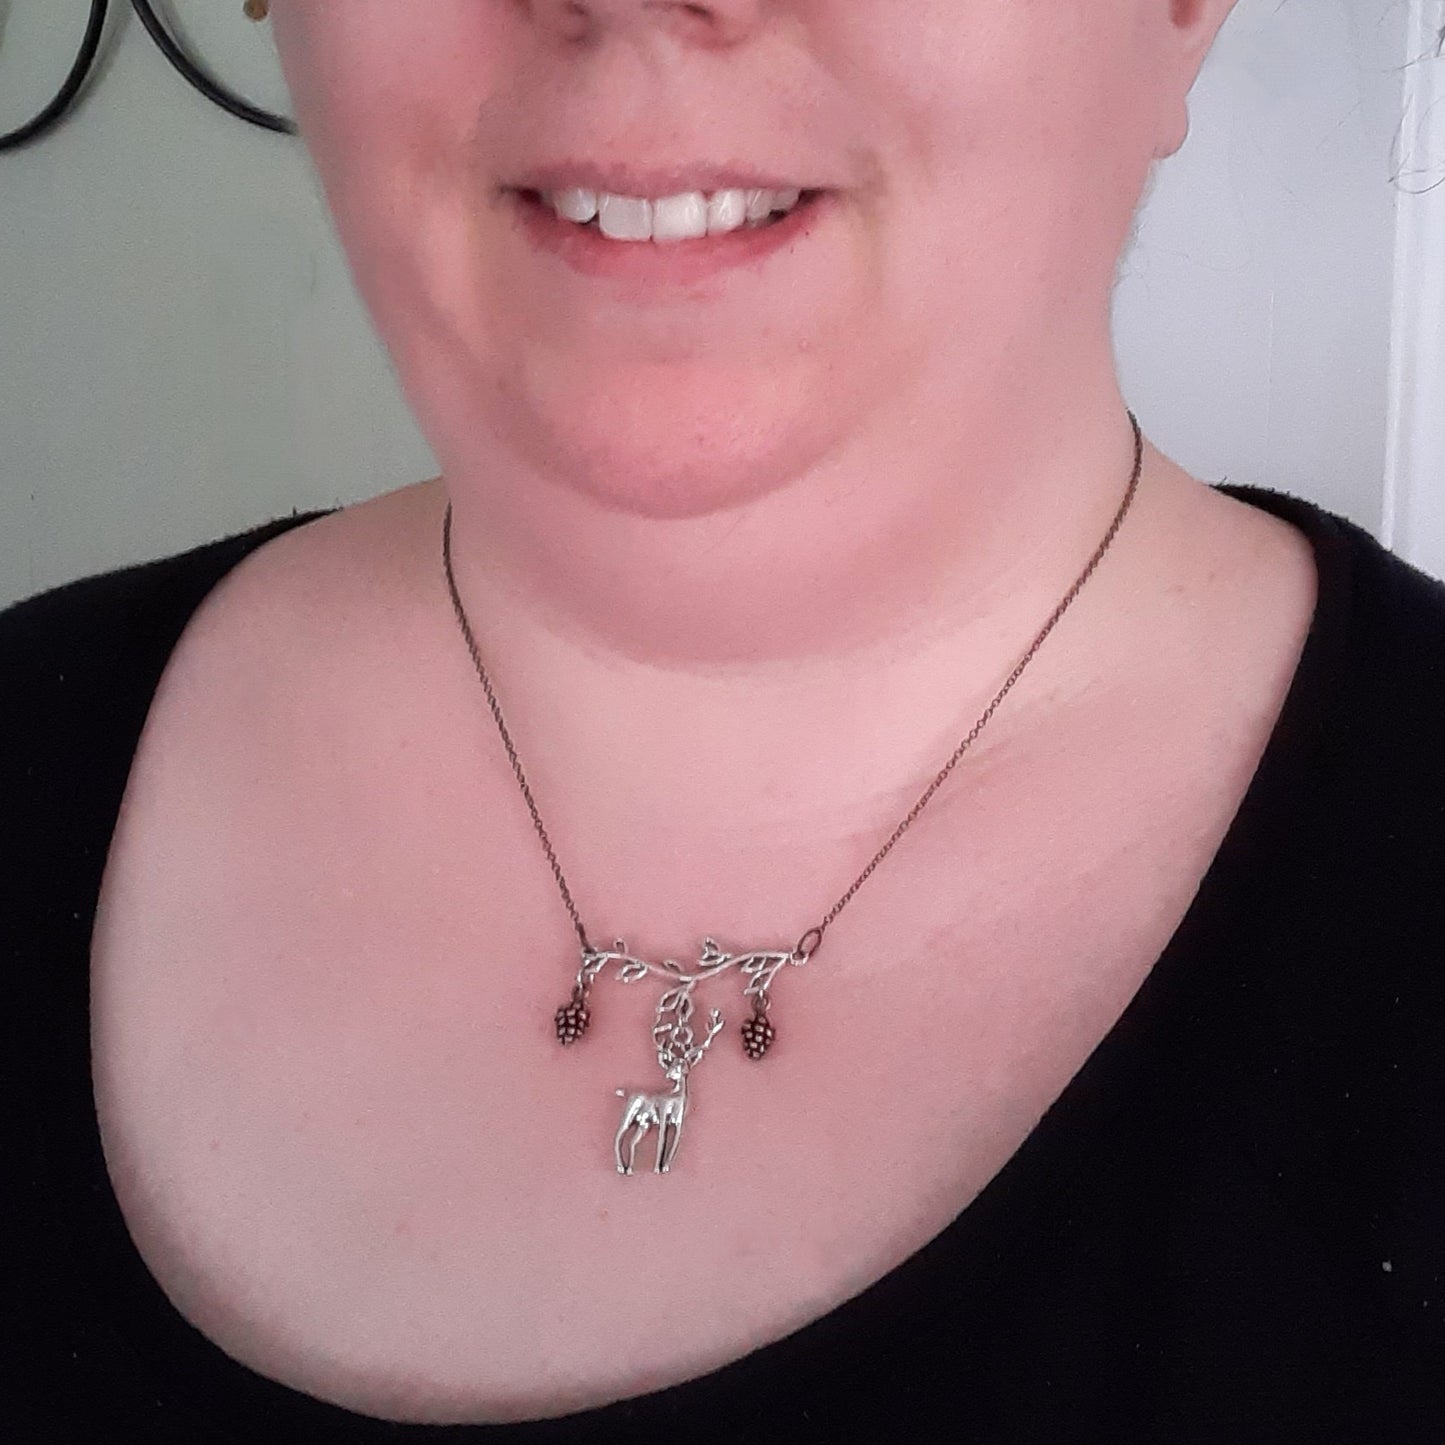 Stag necklace with pinecones